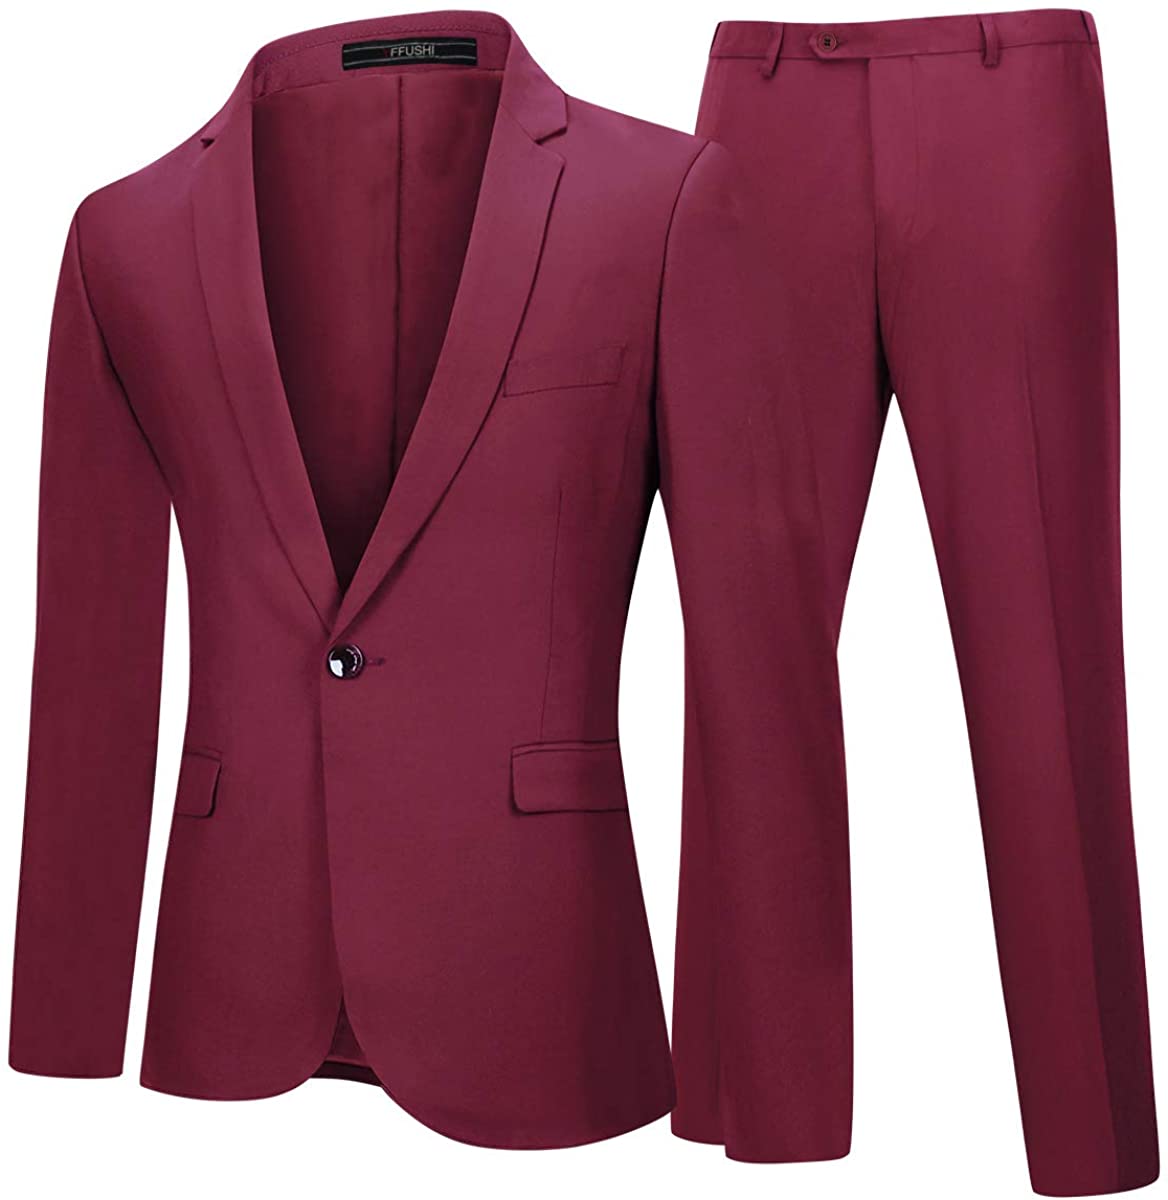 YFFUSHI Mens 2 Piece Suits One Button Formal Slim Fit Solid Color Wedding Tuxedo